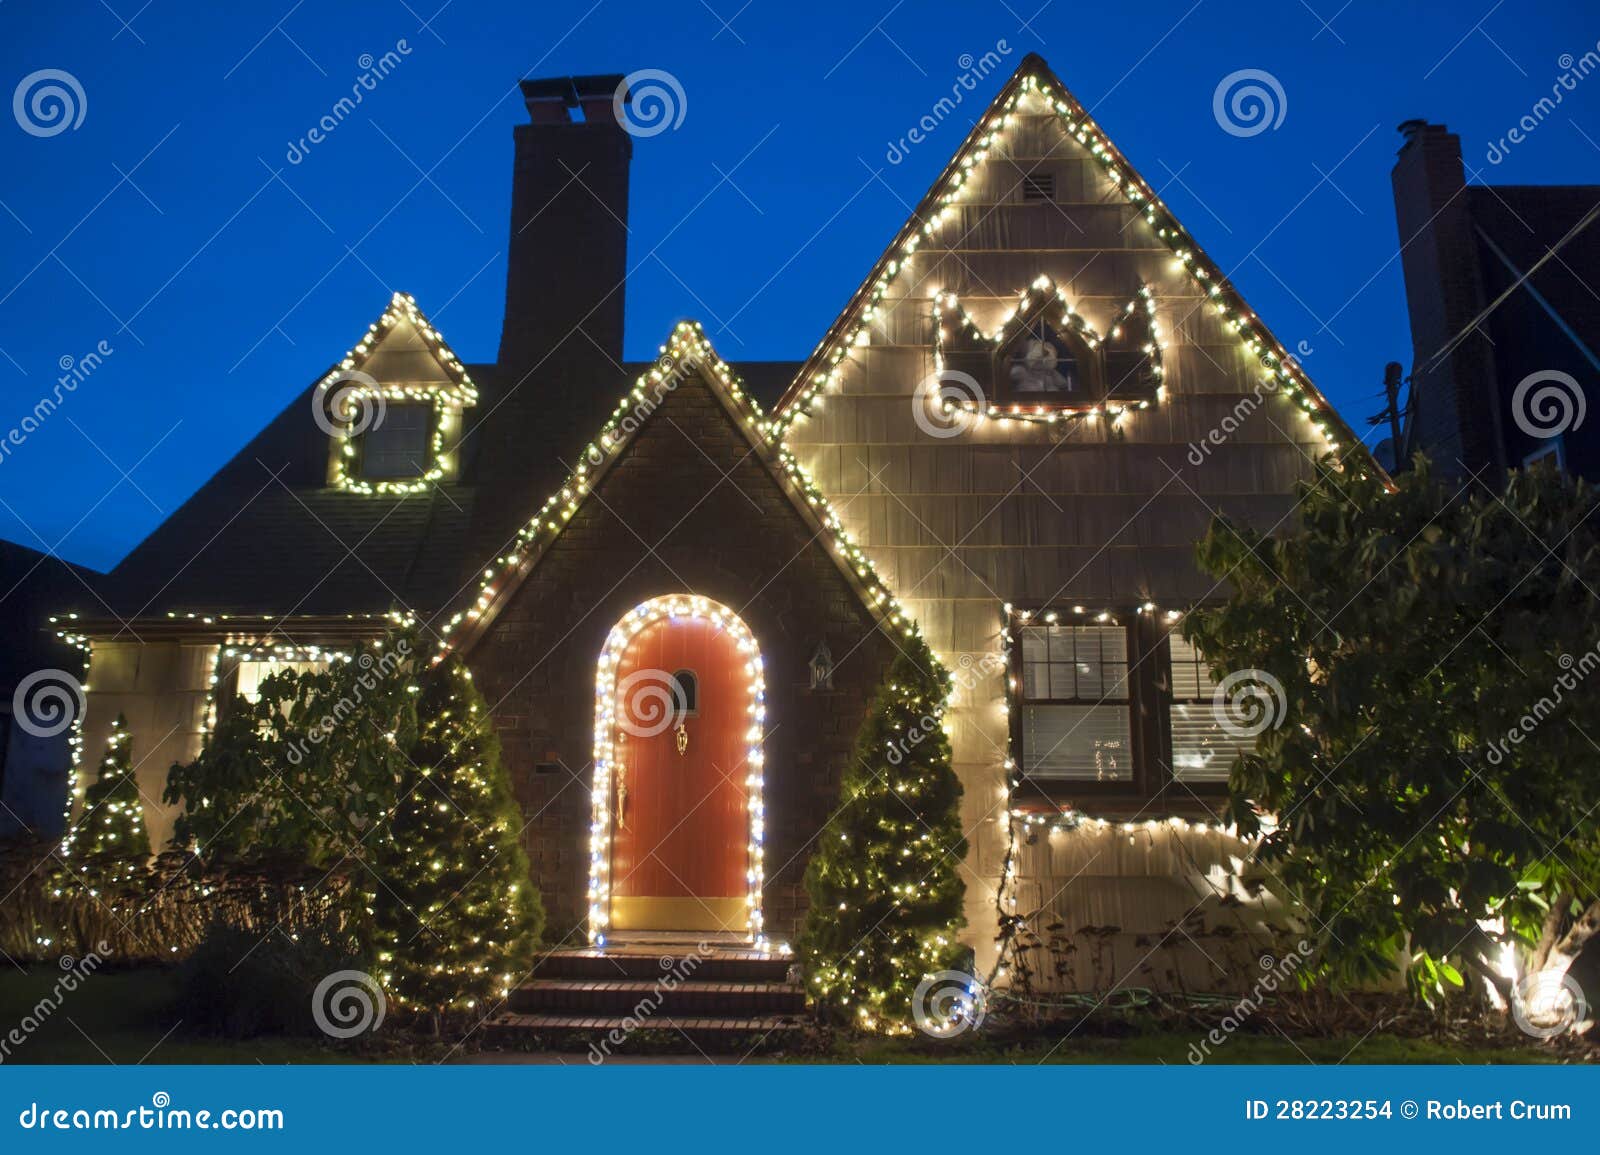 house decorated for christmas